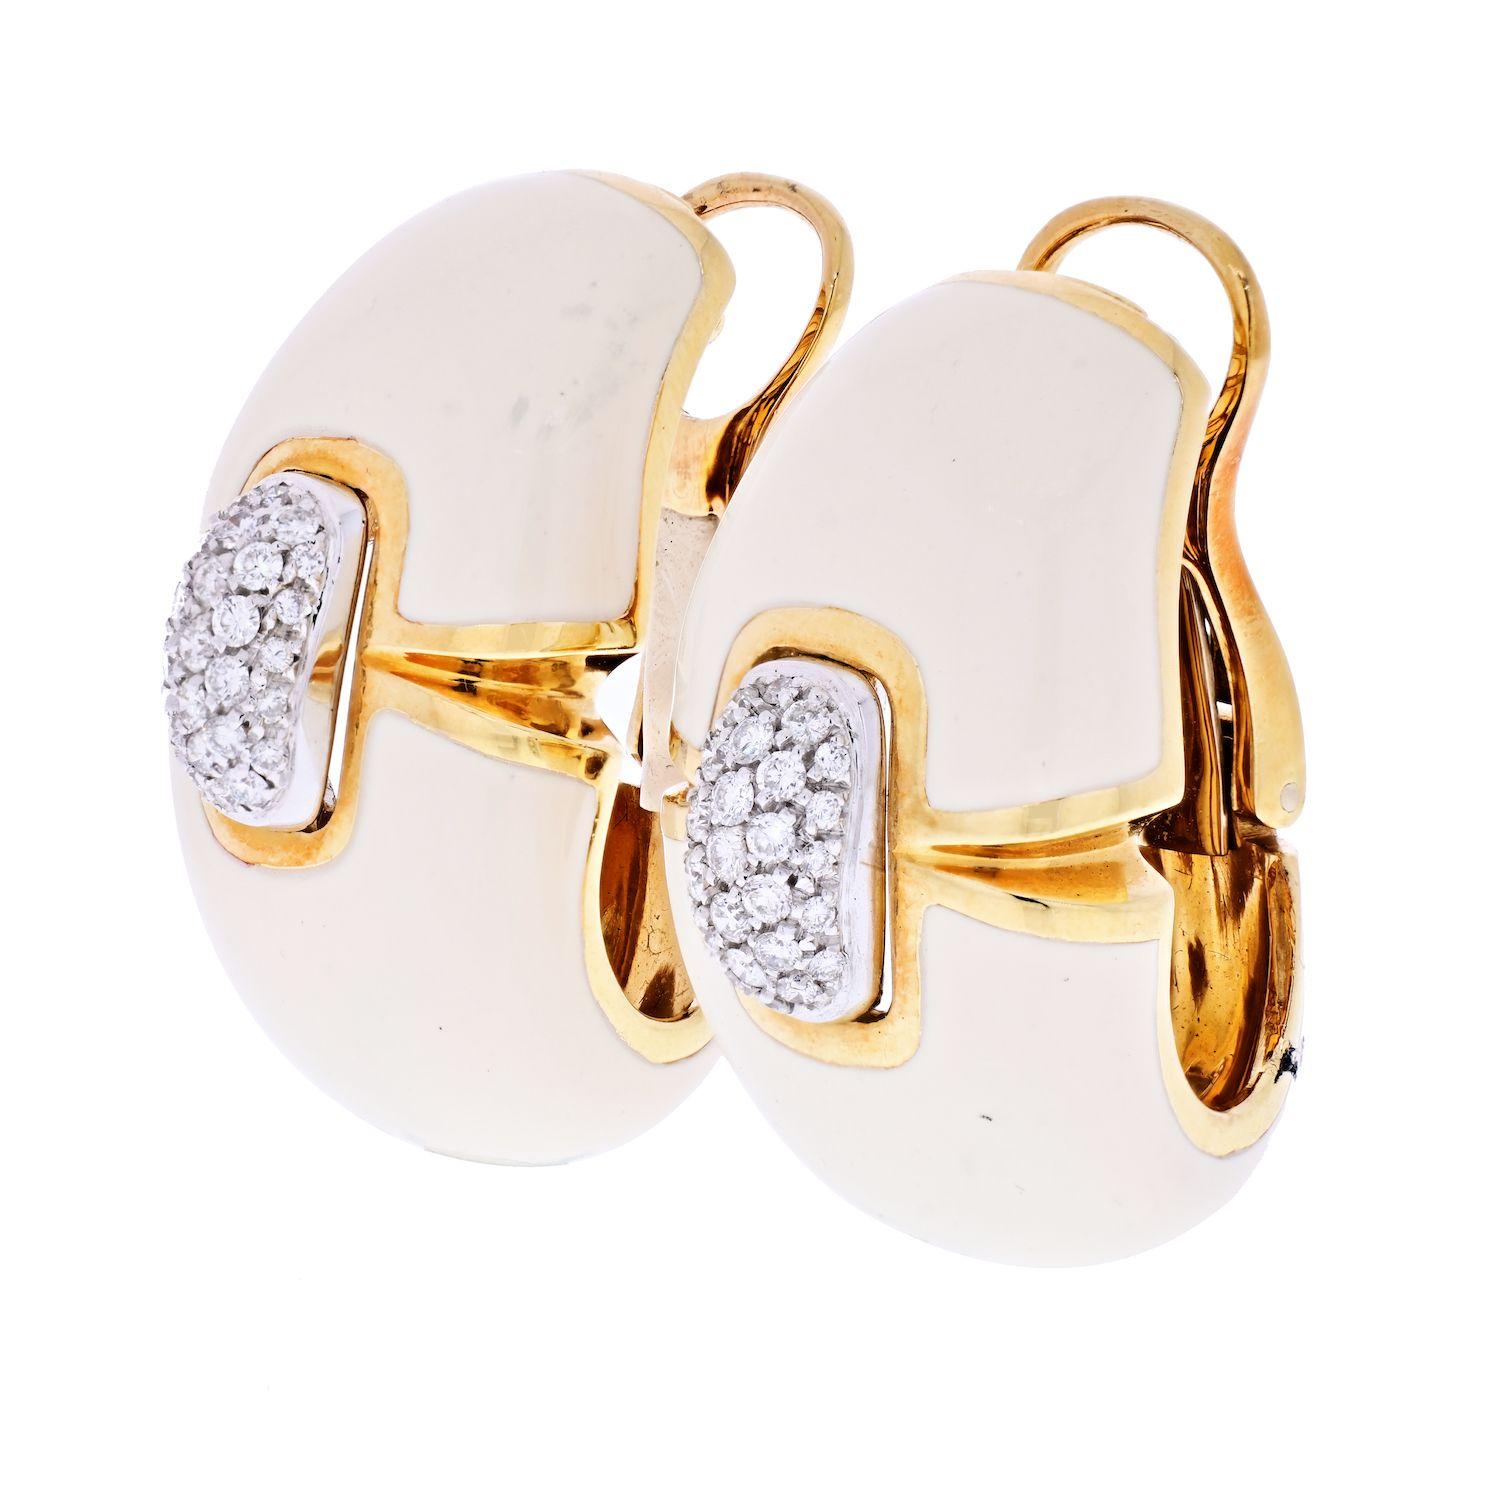 A pair of 18k yellow gold and platinum earrings, set with brilliant-cut diamonds and white enamel, signed David Webb.
Circa 1980s
Length 1.30